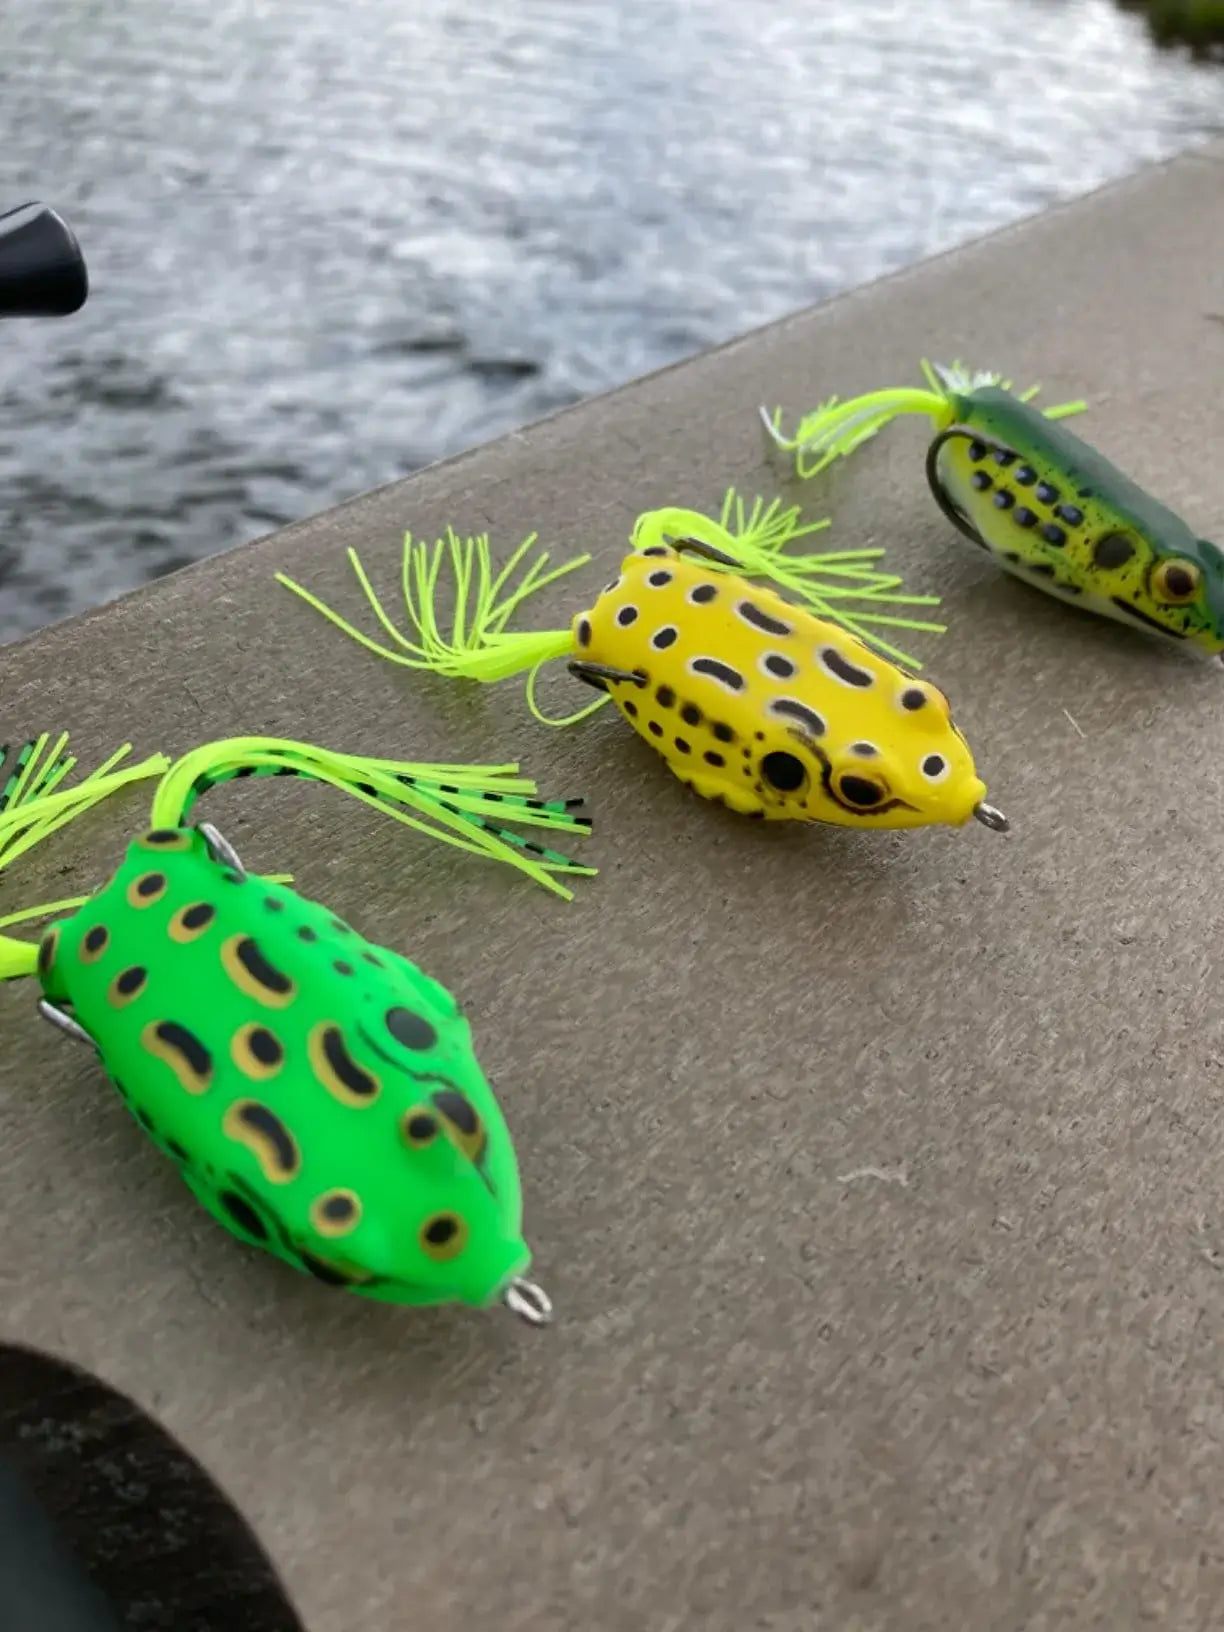 The Top 4 Fishing Lures For Bass In 2022